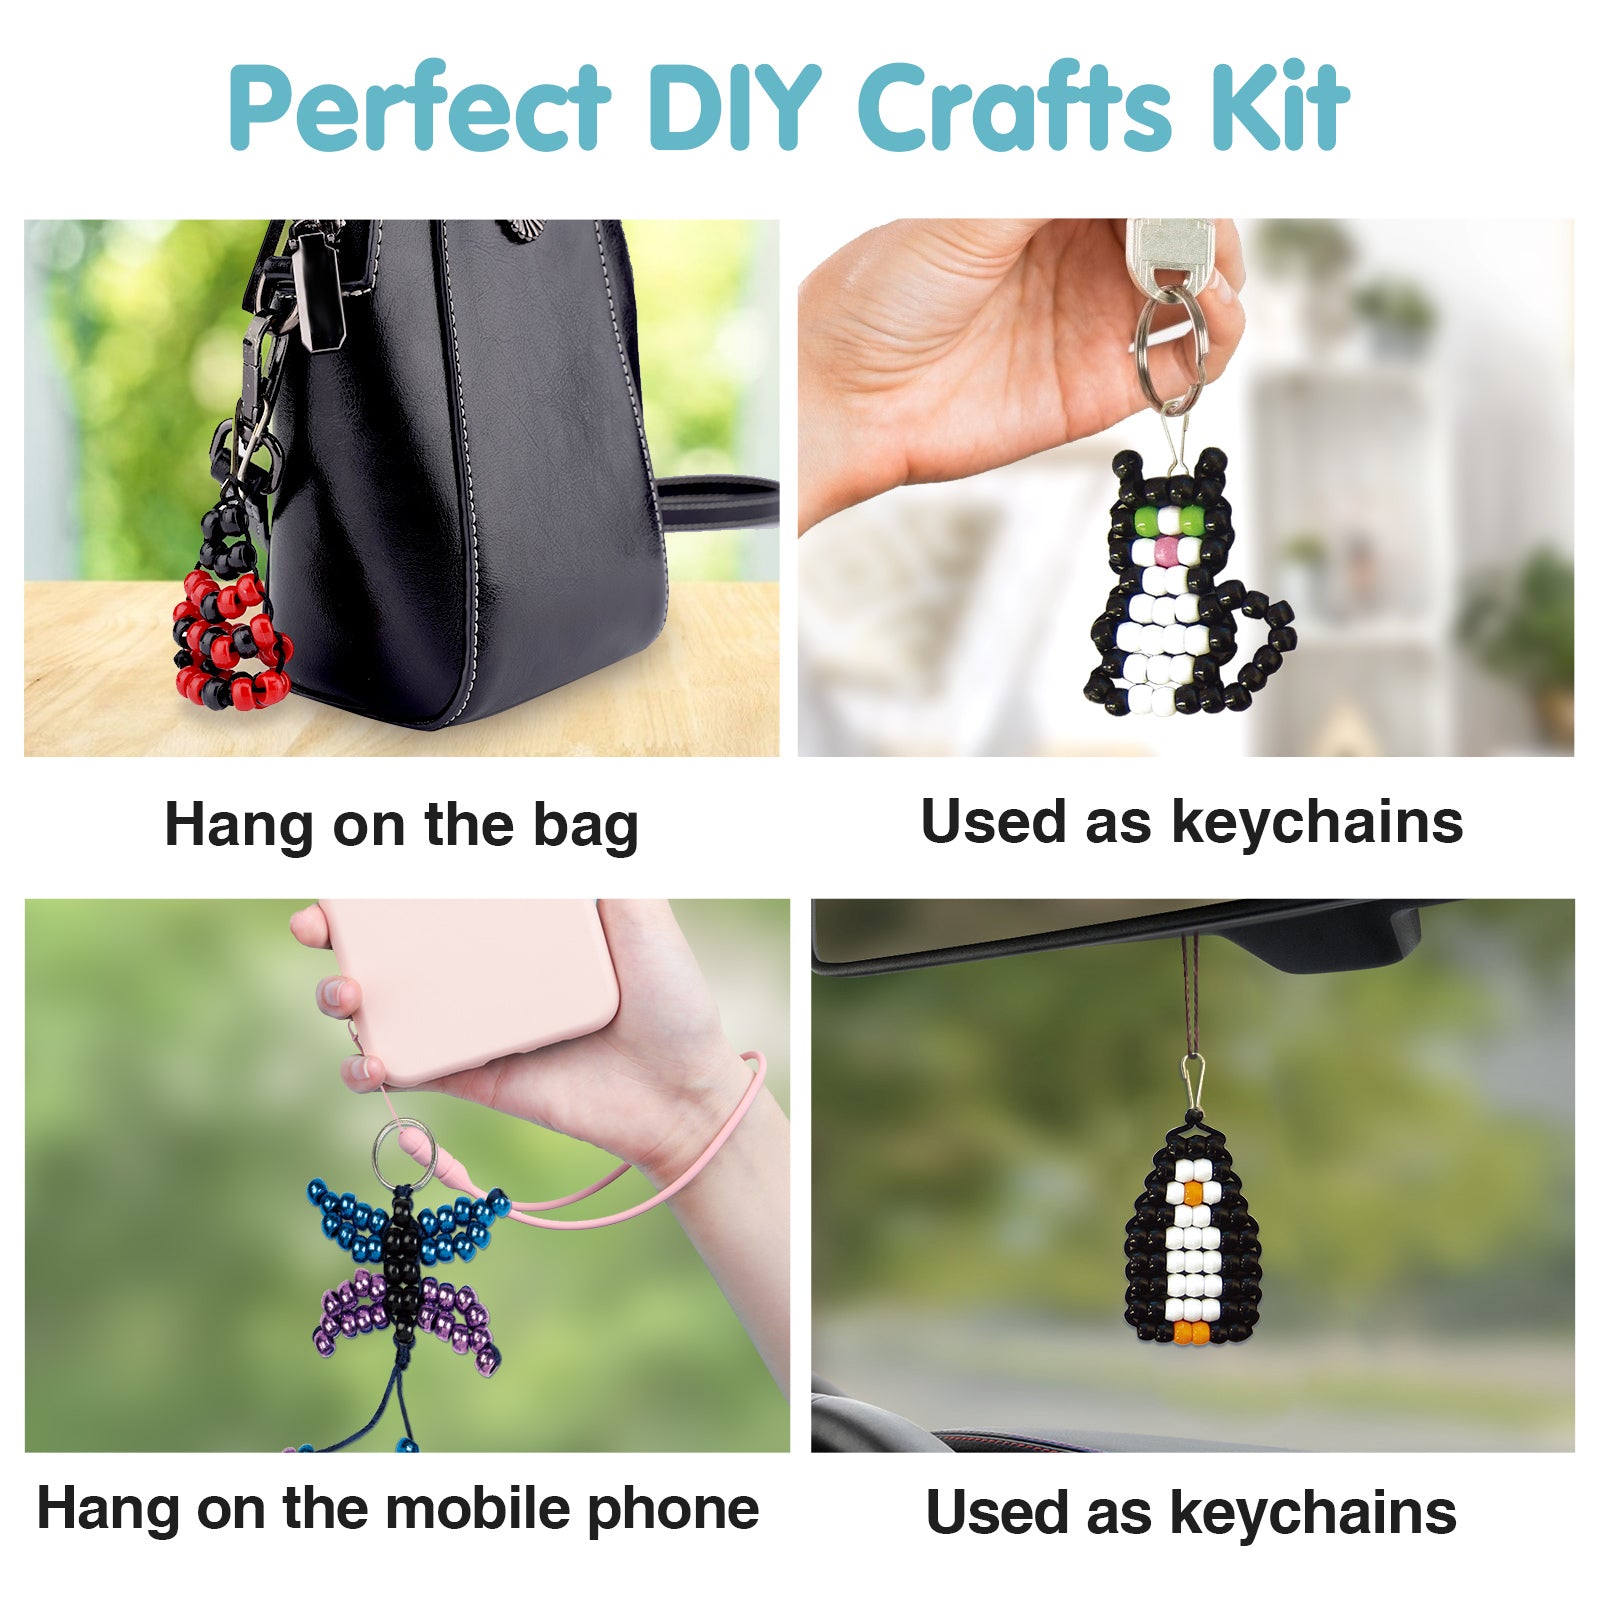 PP OPOUNT Bead Pets Kit, Bead Pets Crafts for Kids with Video Tutorials,  Bead Pet Keychain Includes Beads, Instruction, Cording, Keychains, Needles